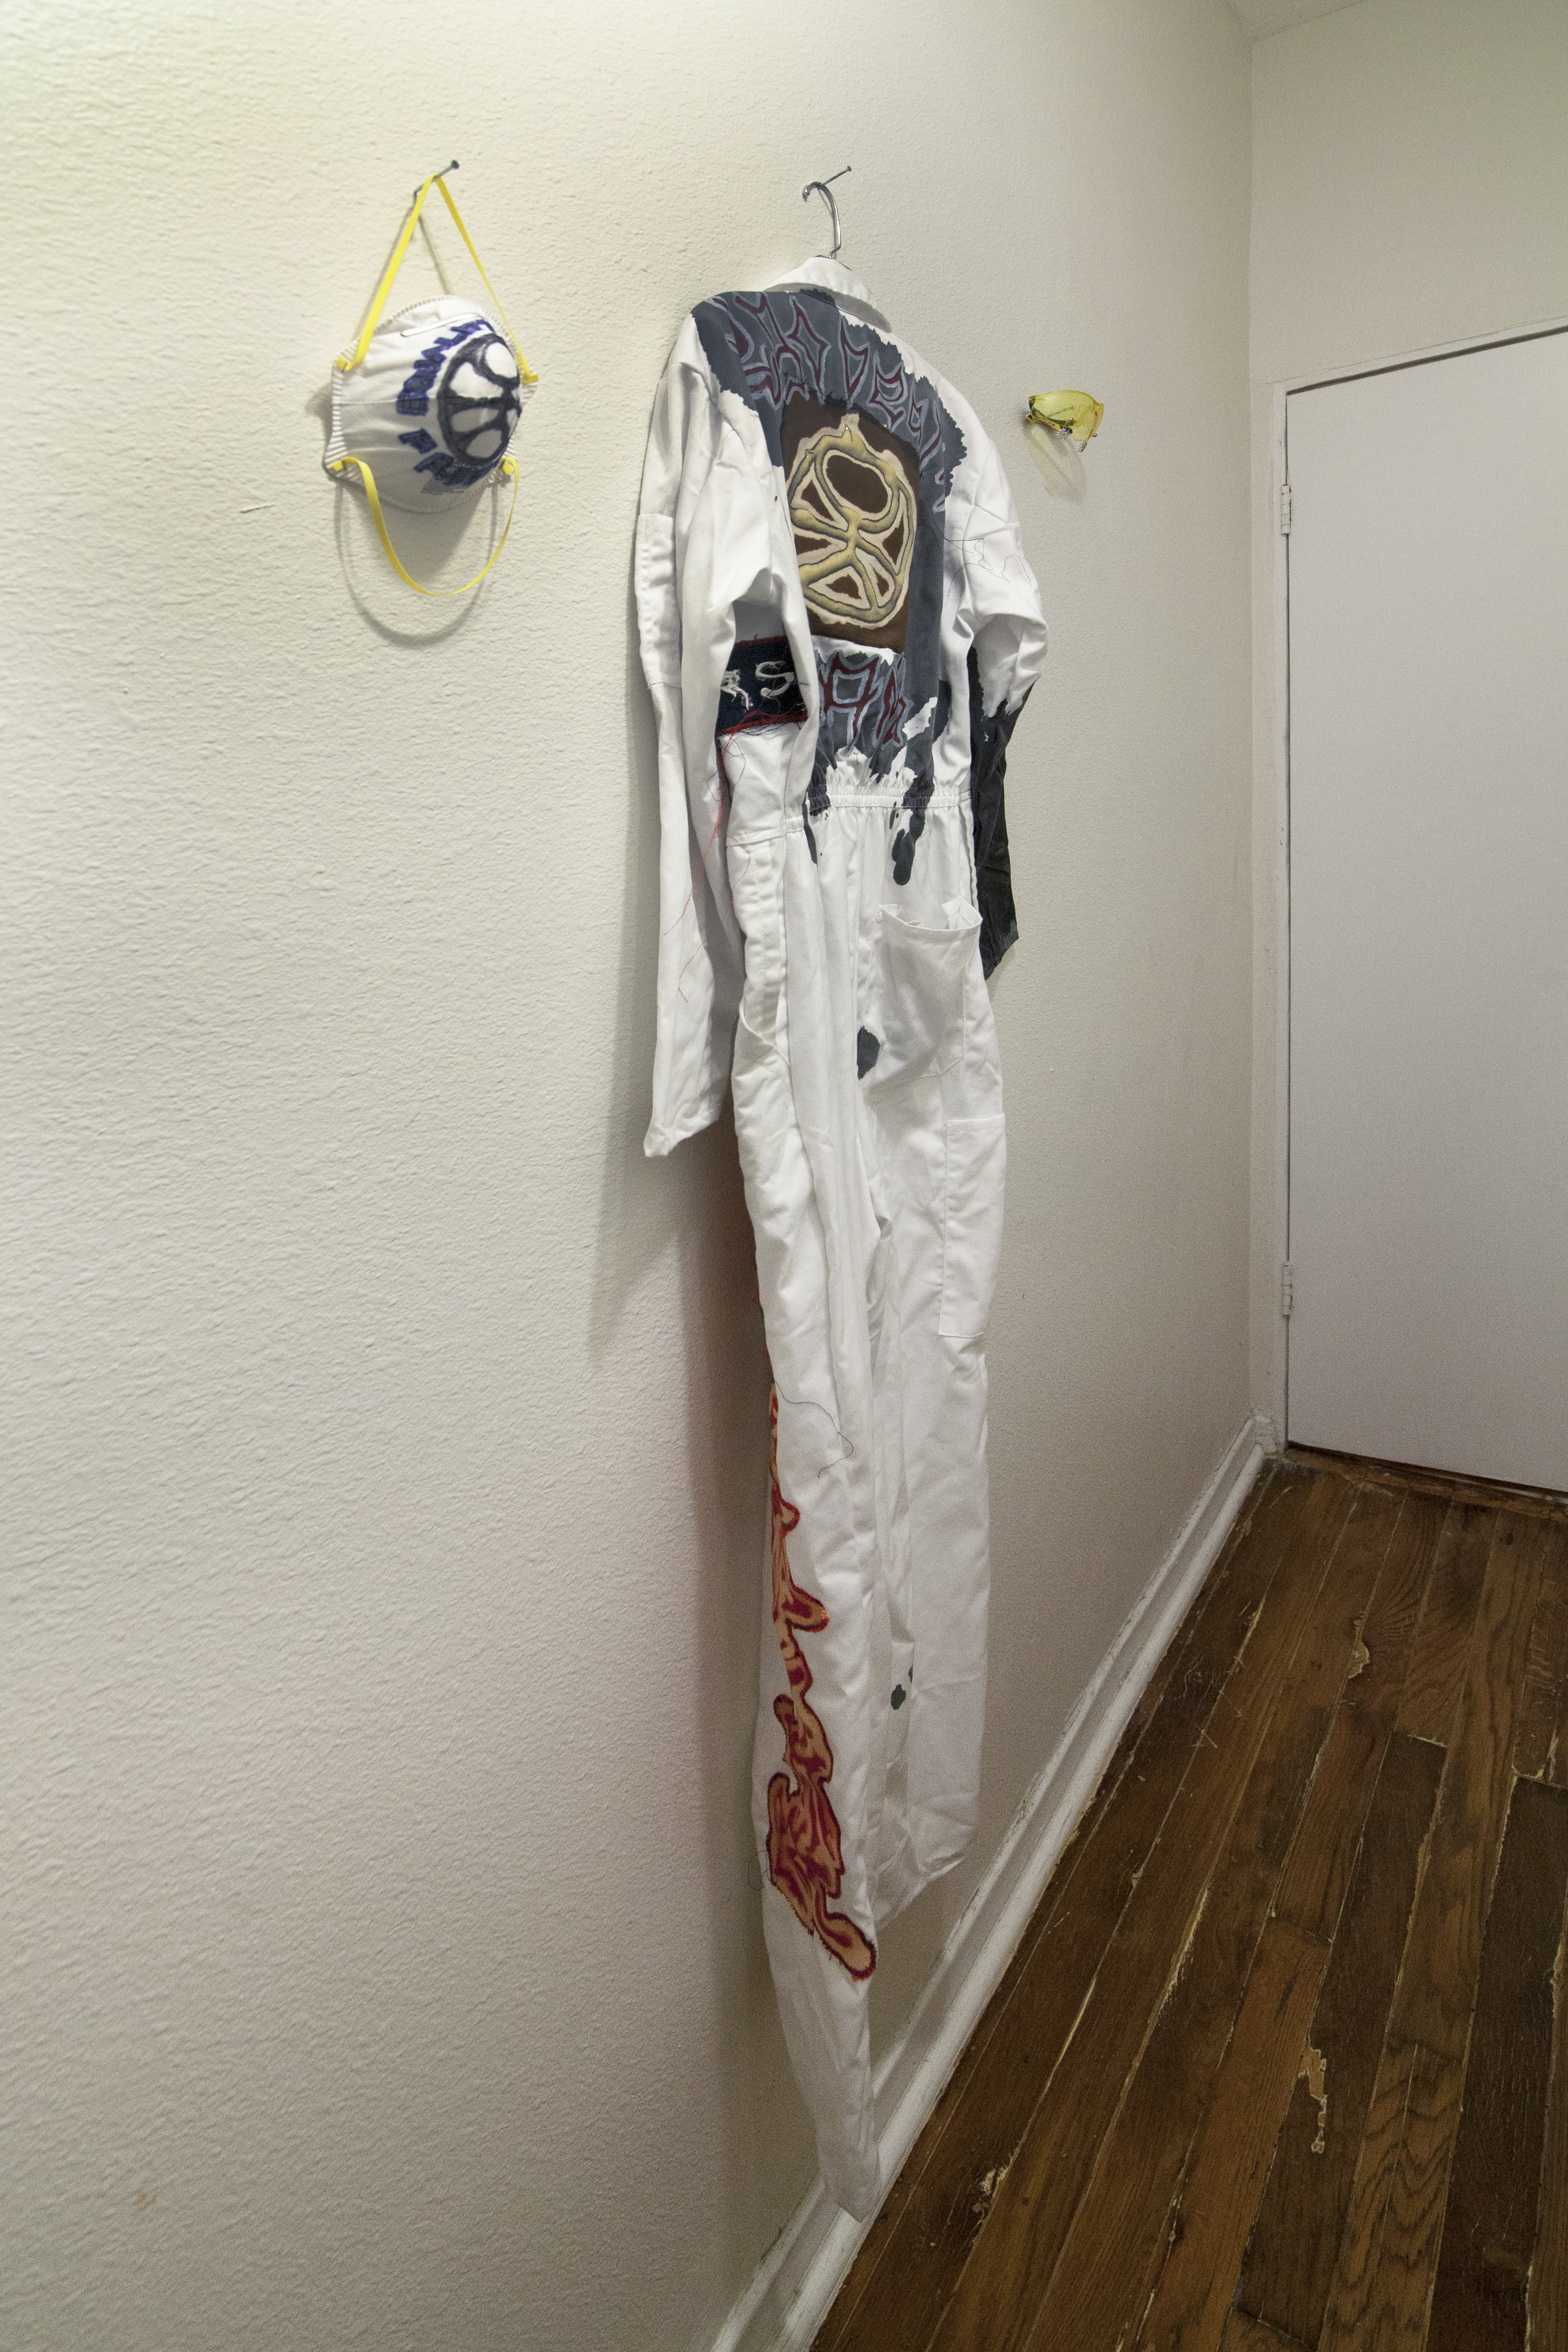 A white jumpsuit and resperator with drawings on them hung on a white wall